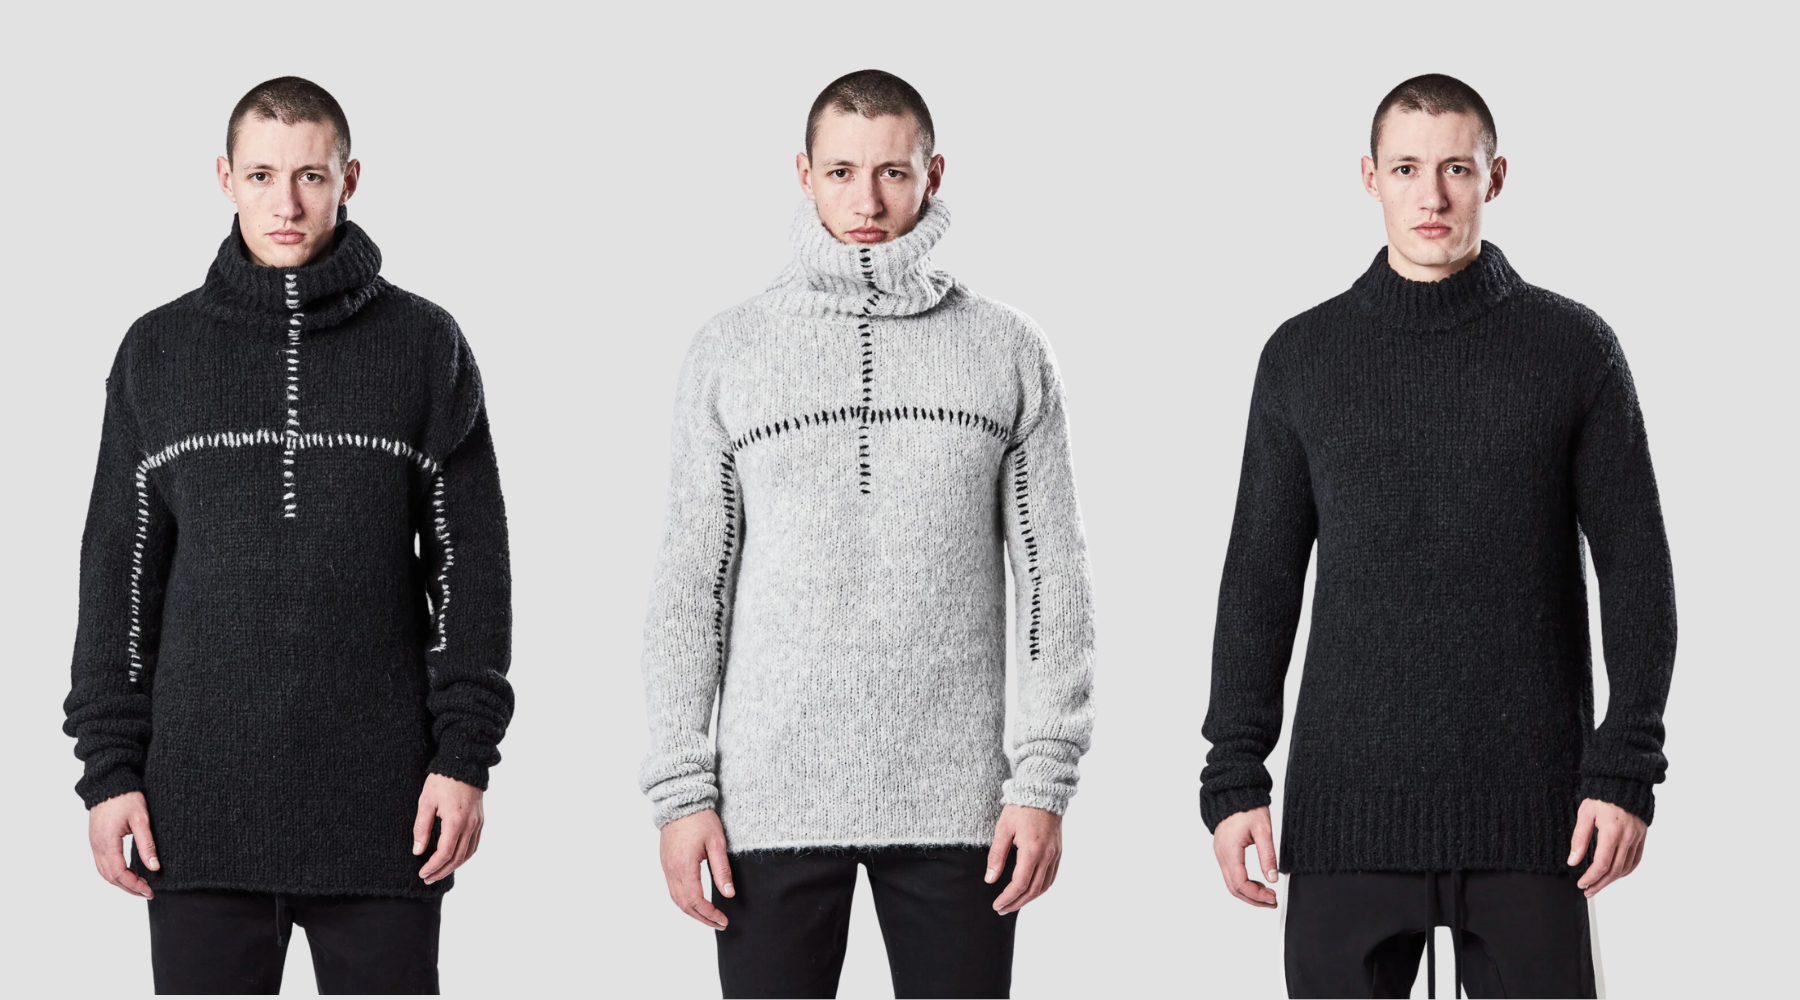 Finding and Comparing the Best Men's Knitwear Options